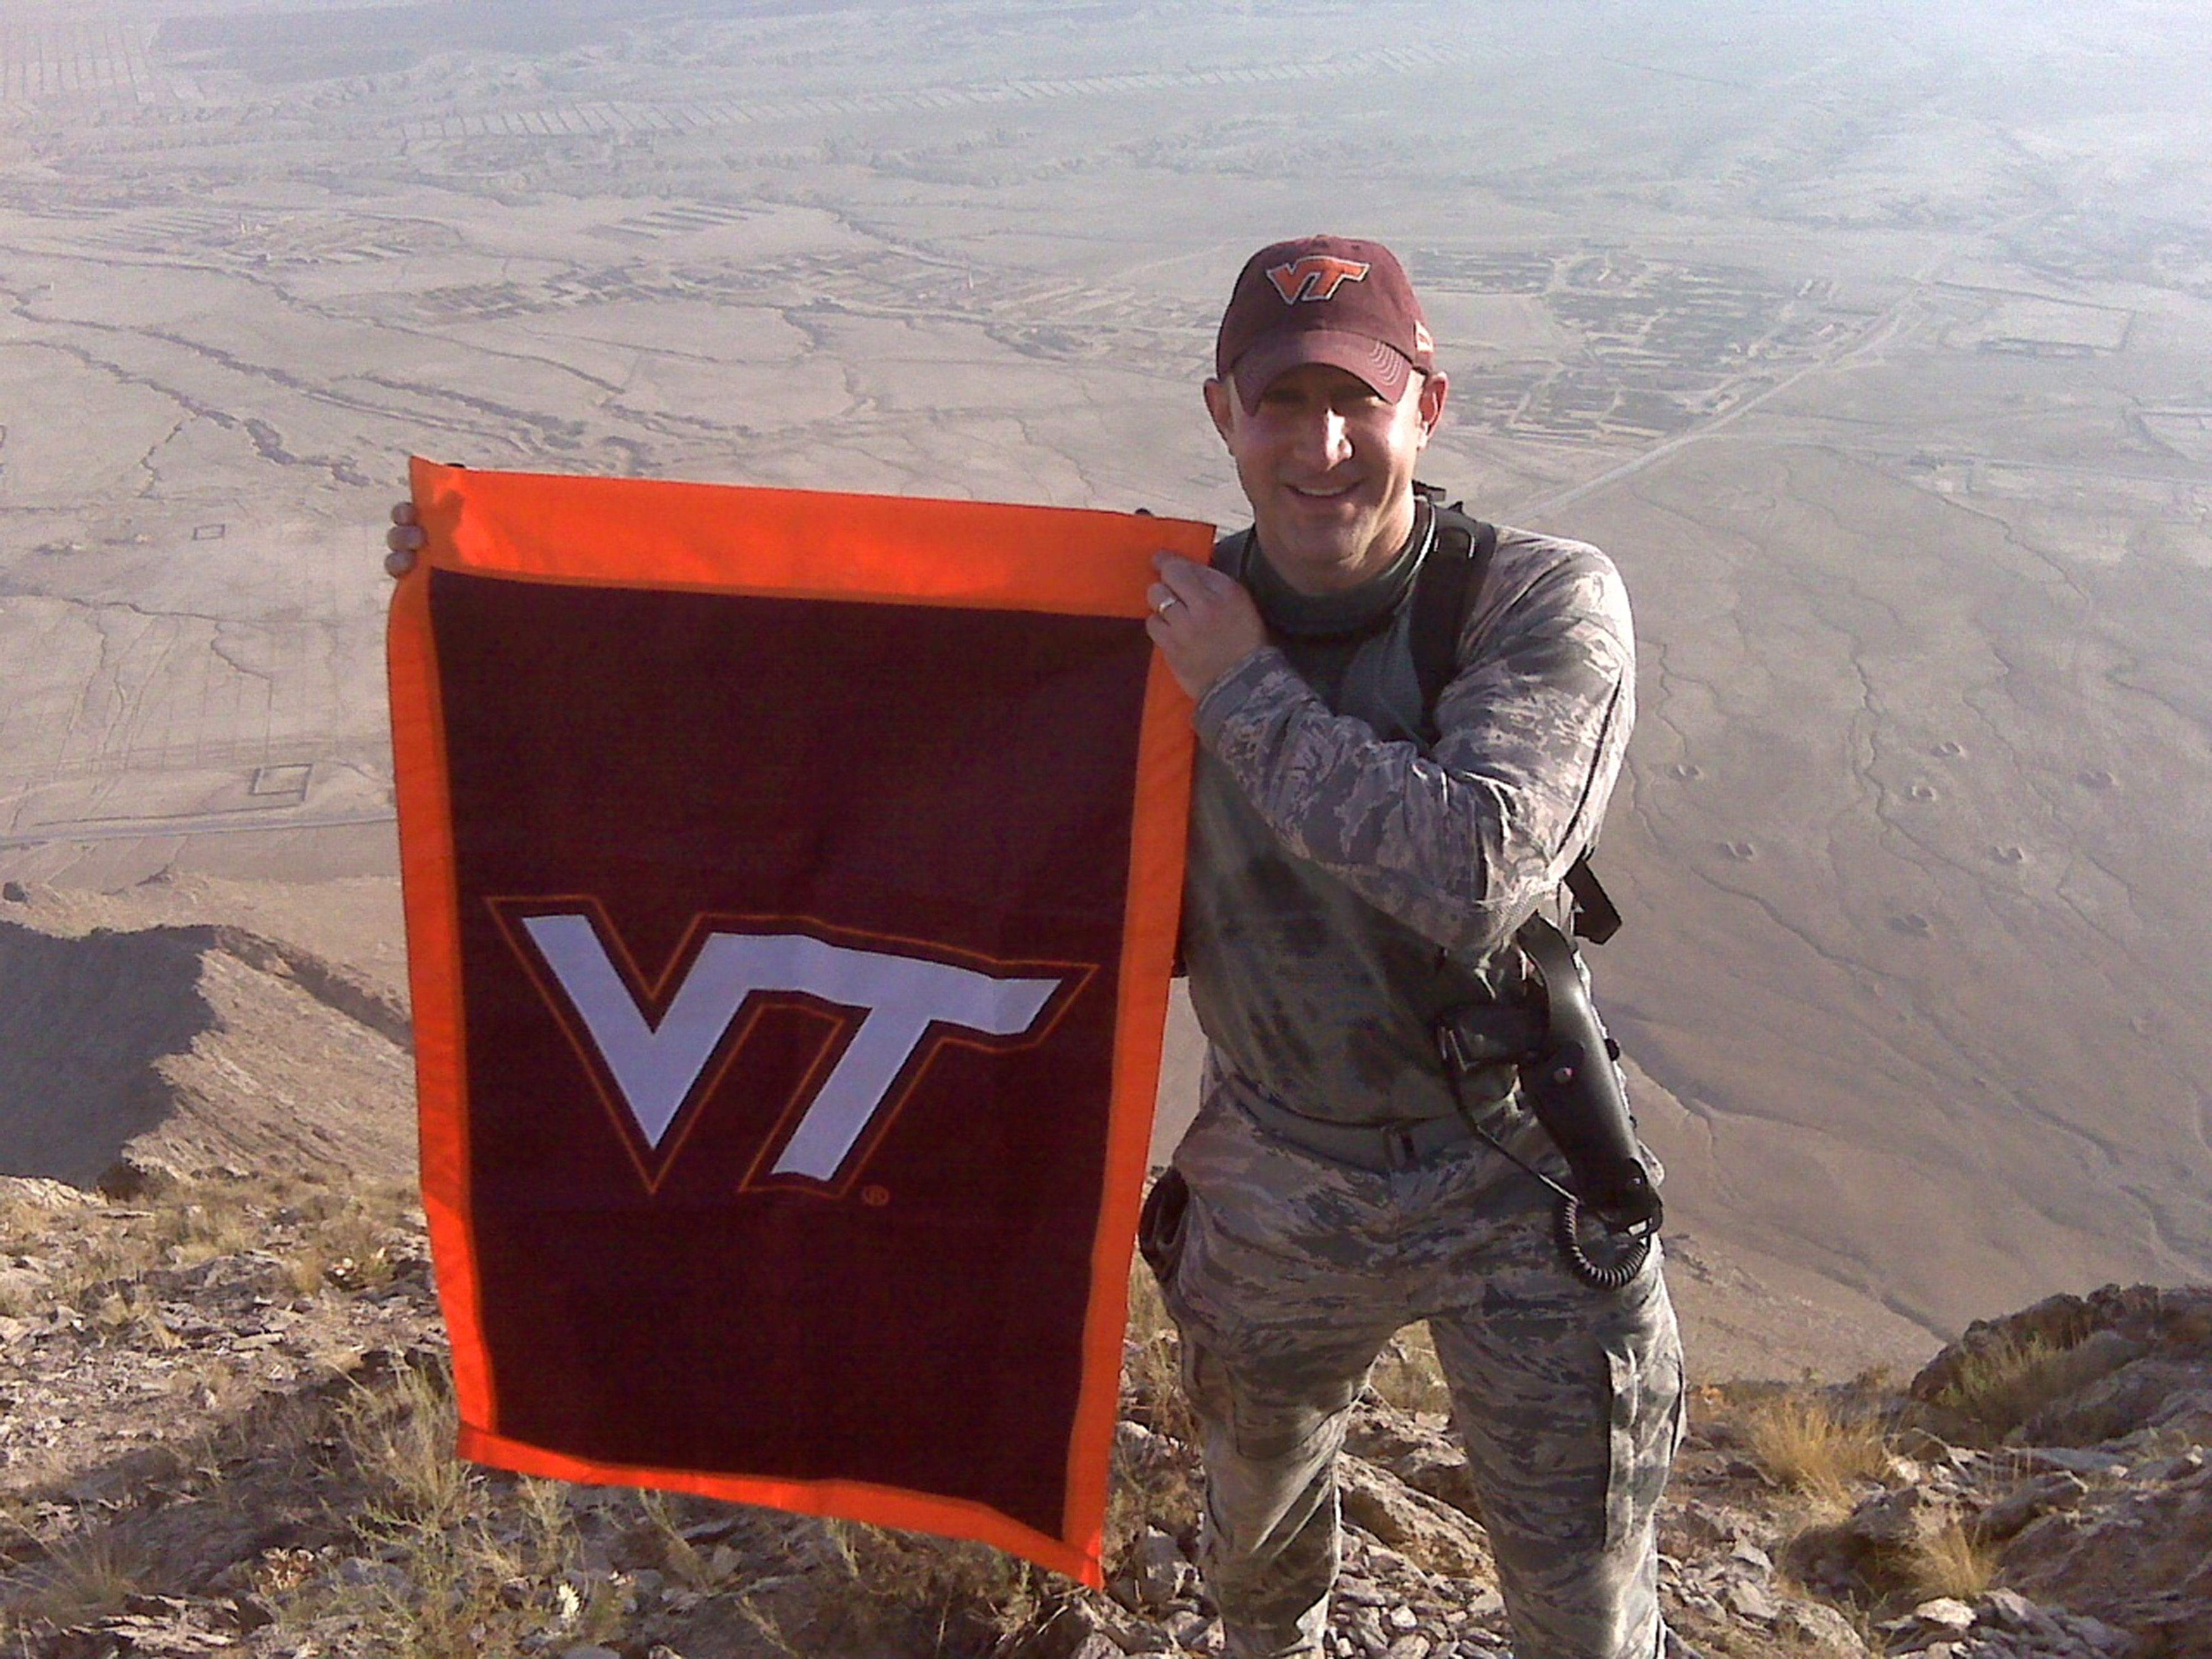 Lt. Col Tom Whitlock, U.S. Air Force, Virginia Tech Corps of Cadets Class of 1995 shown in while on deployment in Afghanistan